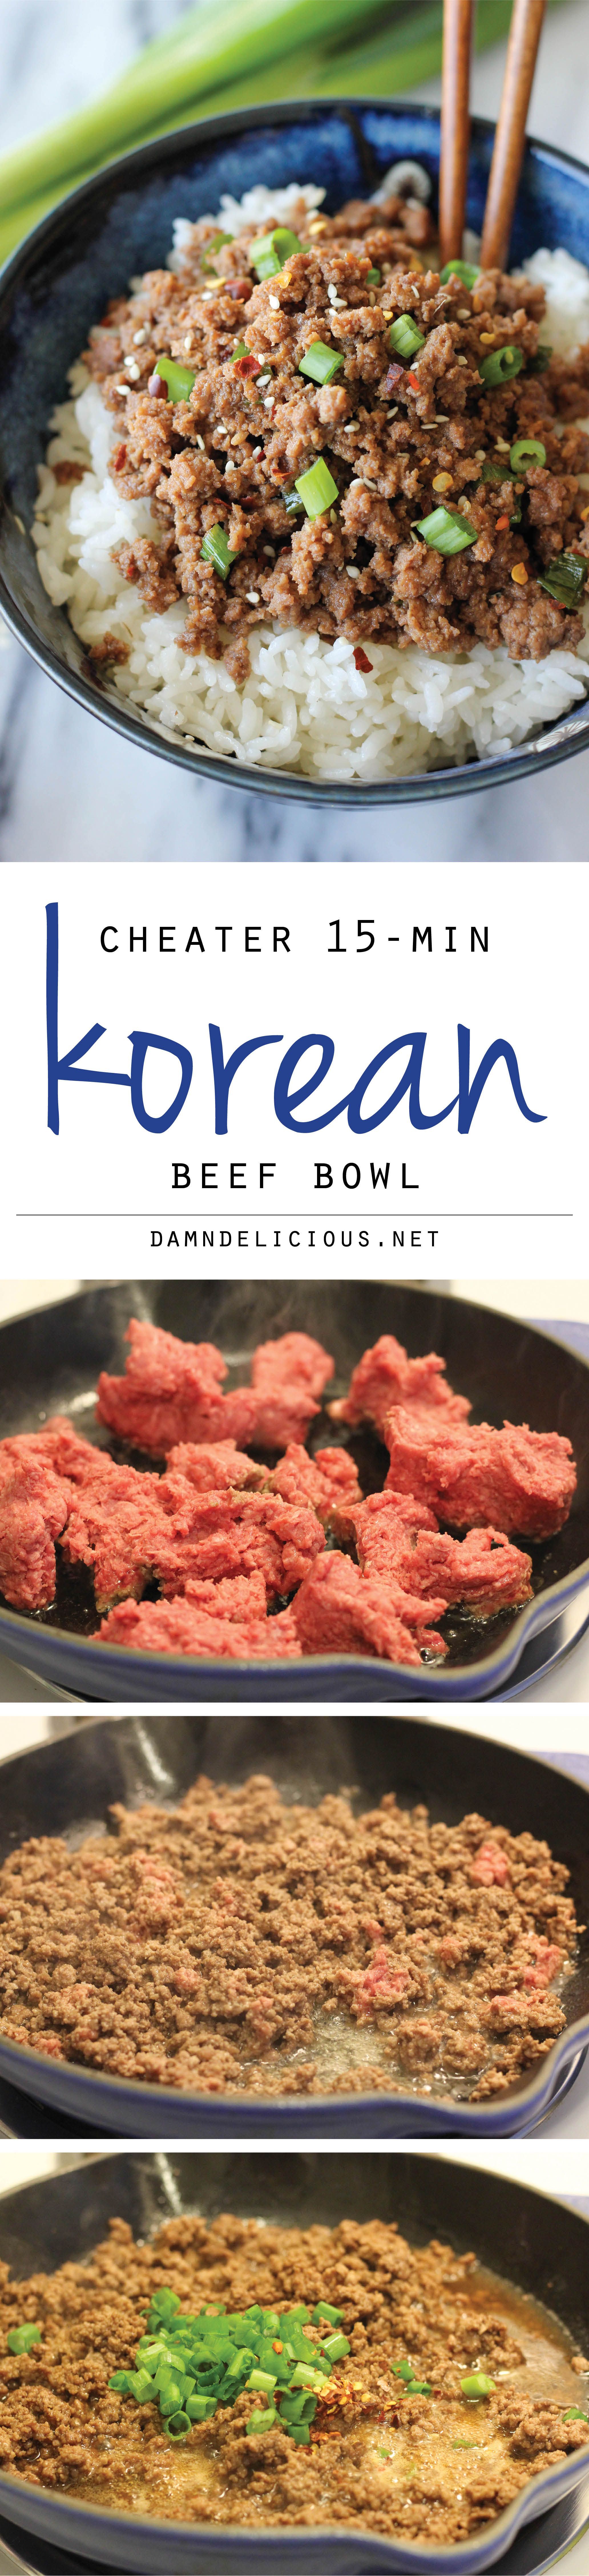 Korean Beef Bowl – Tastes just like Korean BBQ and is on your dinner table in just 15 minutes!